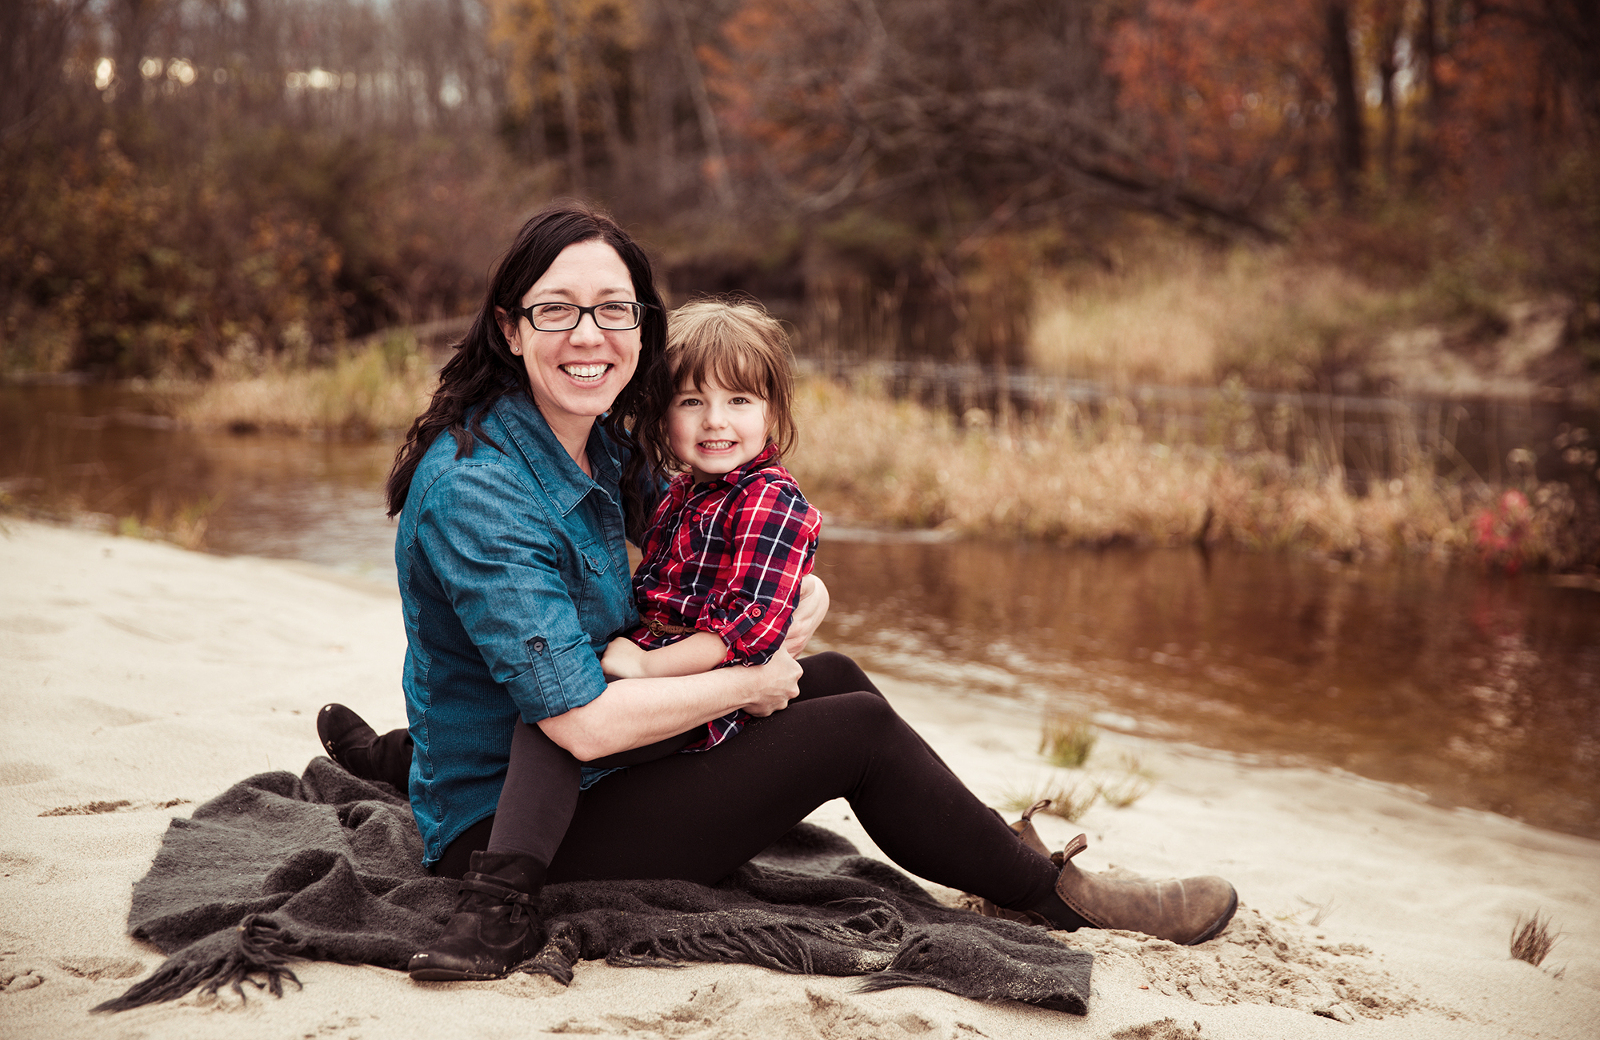 Mother and daughter outdoor portrait session, featuring them sitting together on a sandy beach area of the Whitson River in Val Caron near Sudbury, Ontario on a fall day. Image by Helga Himer Photography.